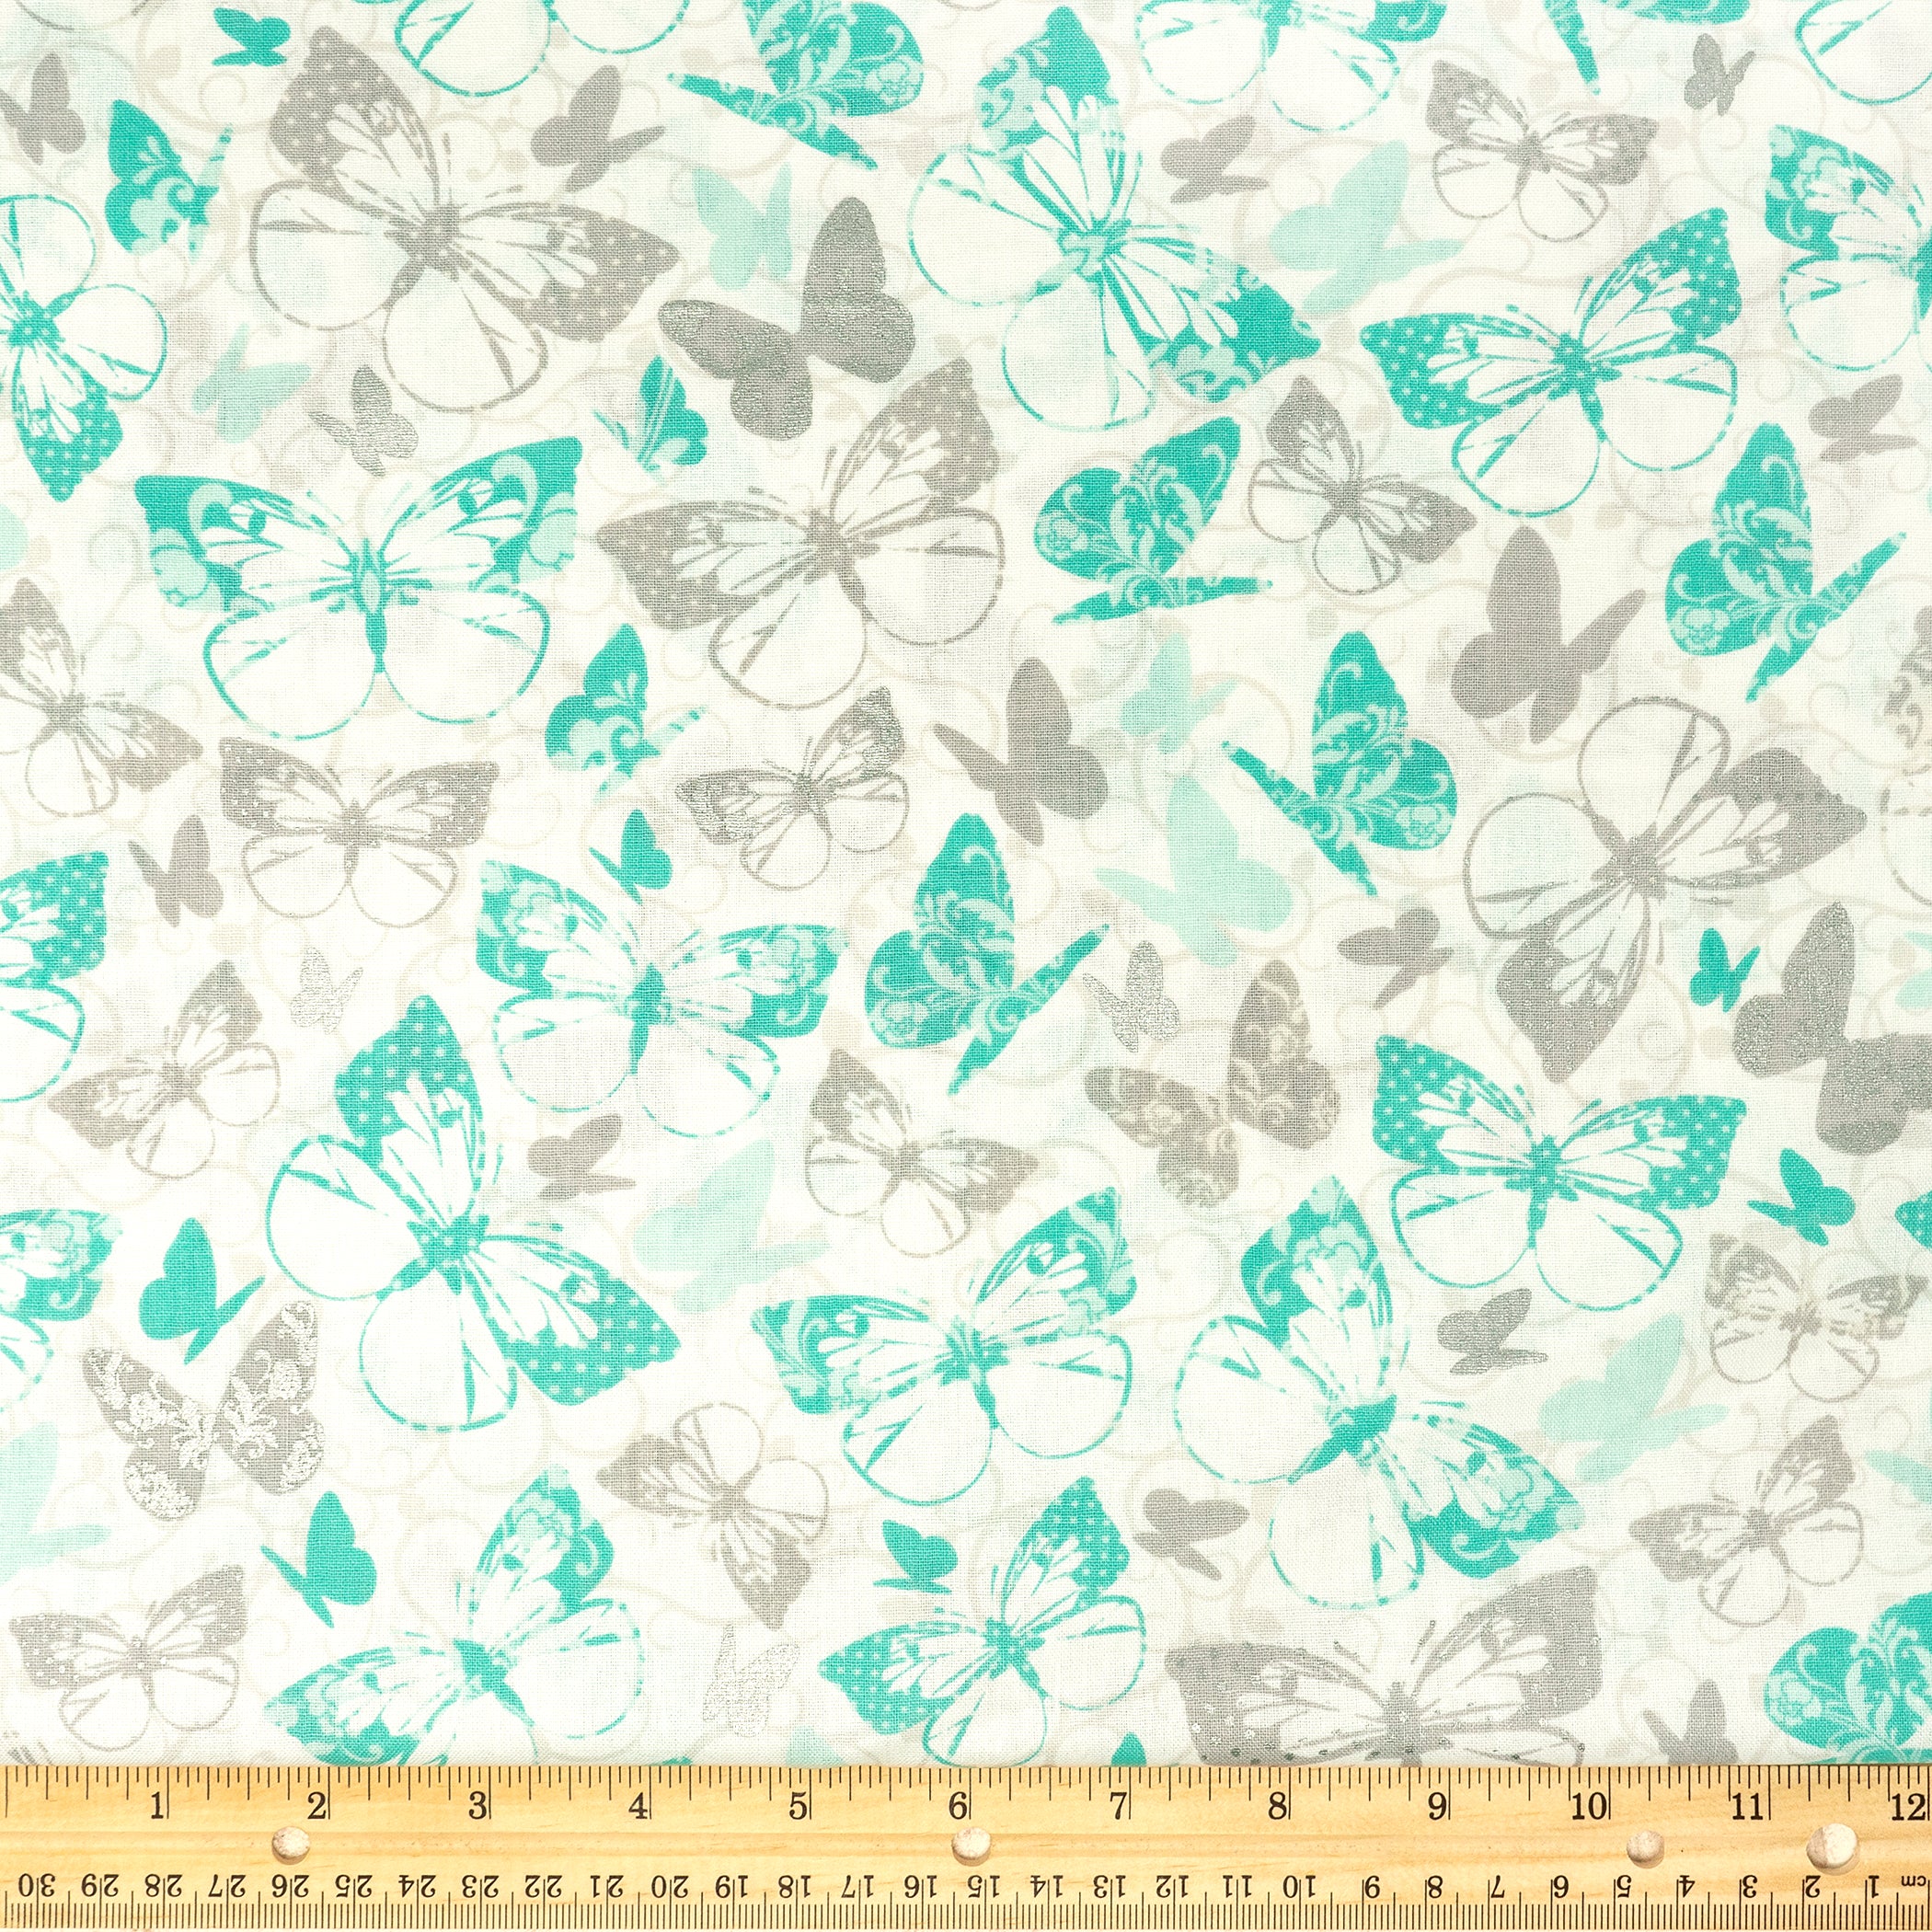 Waverly Inspirations Cotton 44" Butterfly Aqua Silver Color Sewing Fabric by the Yard